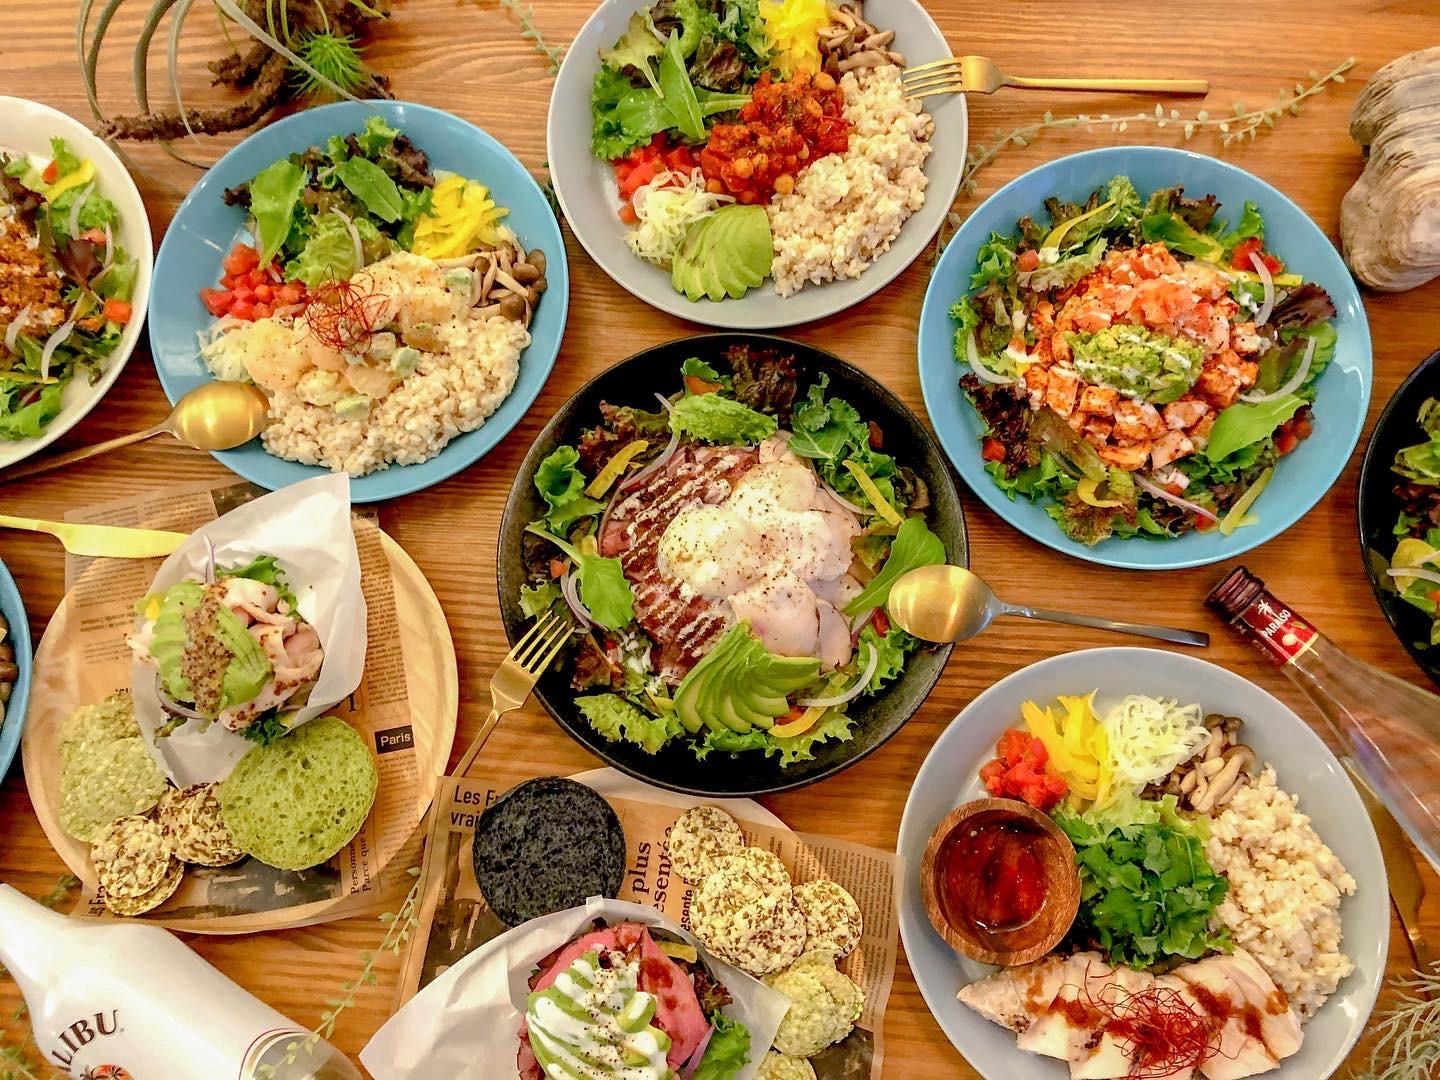 A plant-based cafe and restaurant that uses ingredients from Miyazaki-1